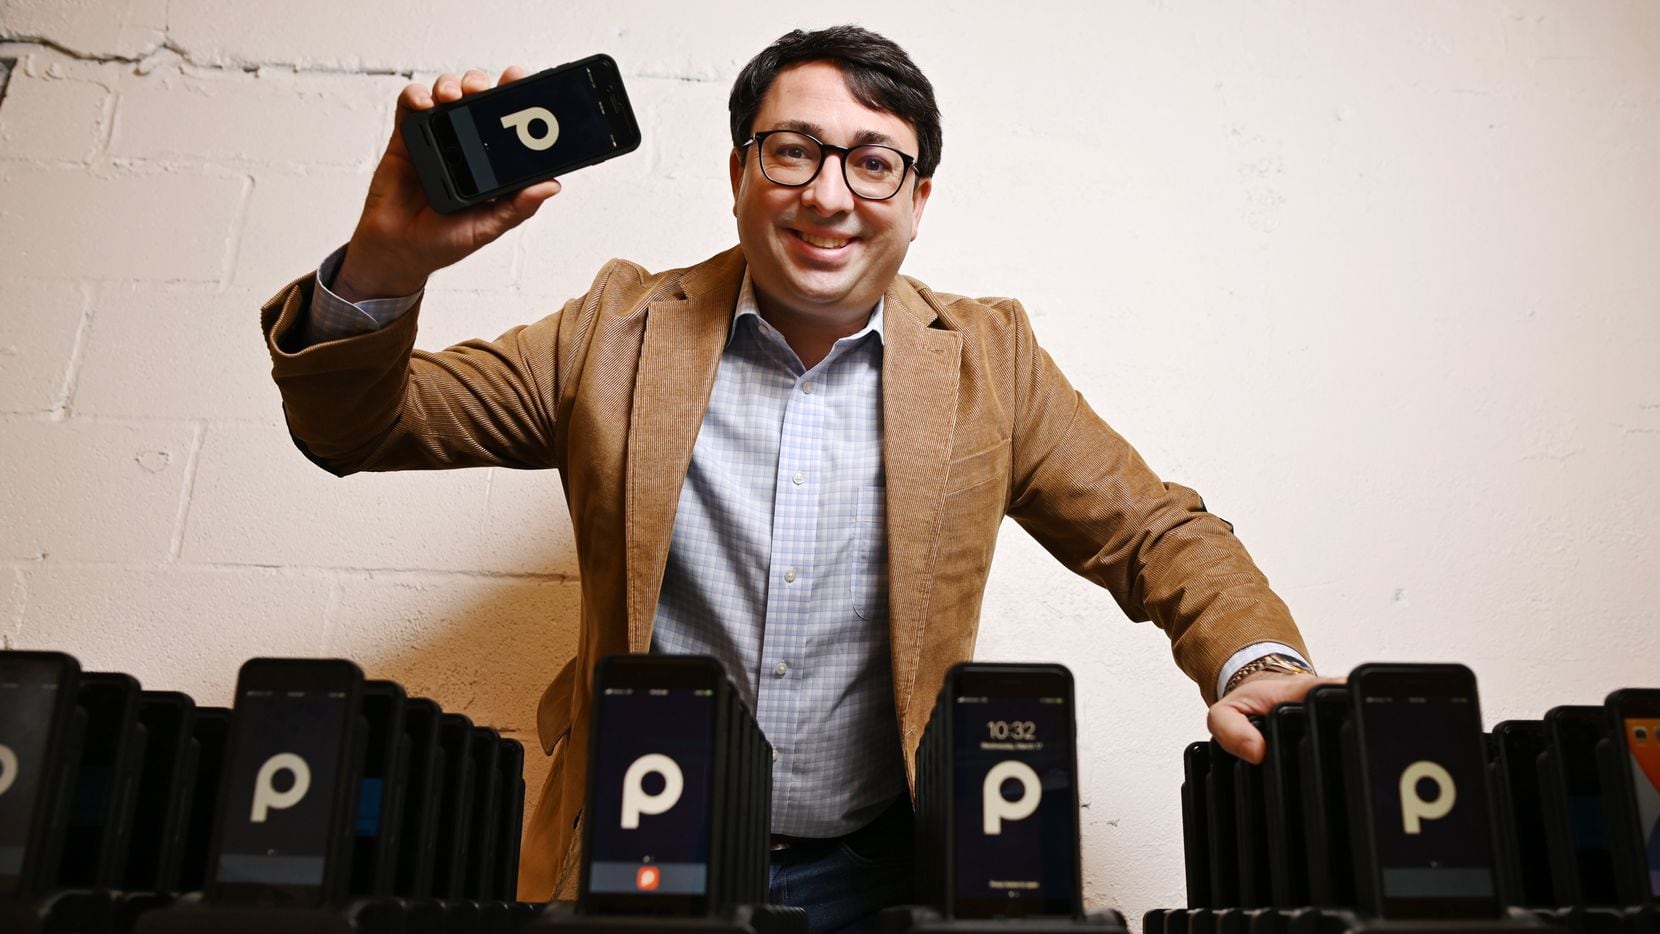 George Baker, founder, chairman and CEO of ParkHub, holds a point-of-sale device near a group of scanners at the company's offices in Dallas. The device can be used to sell or grant access into a parking or camping site.